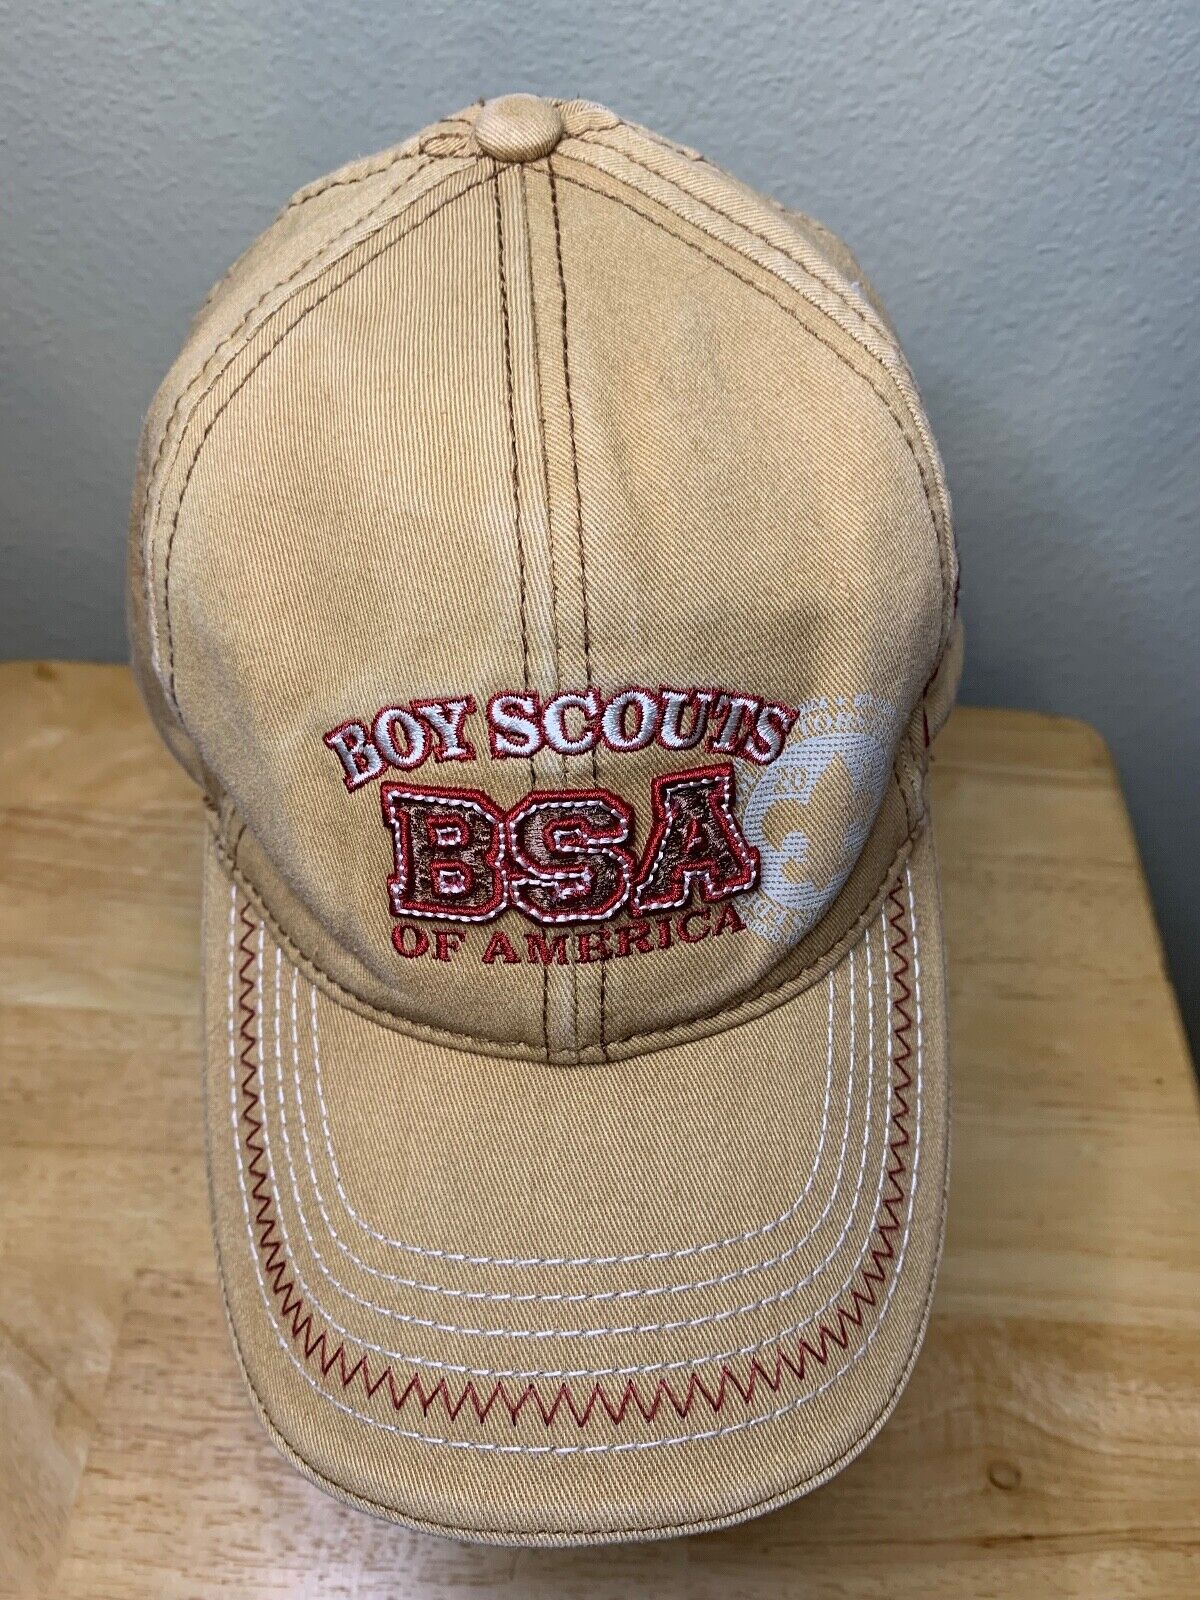 Boy Scouts Since 1910 Ball Cap Collector's Edition Adult OSFA Great Condition